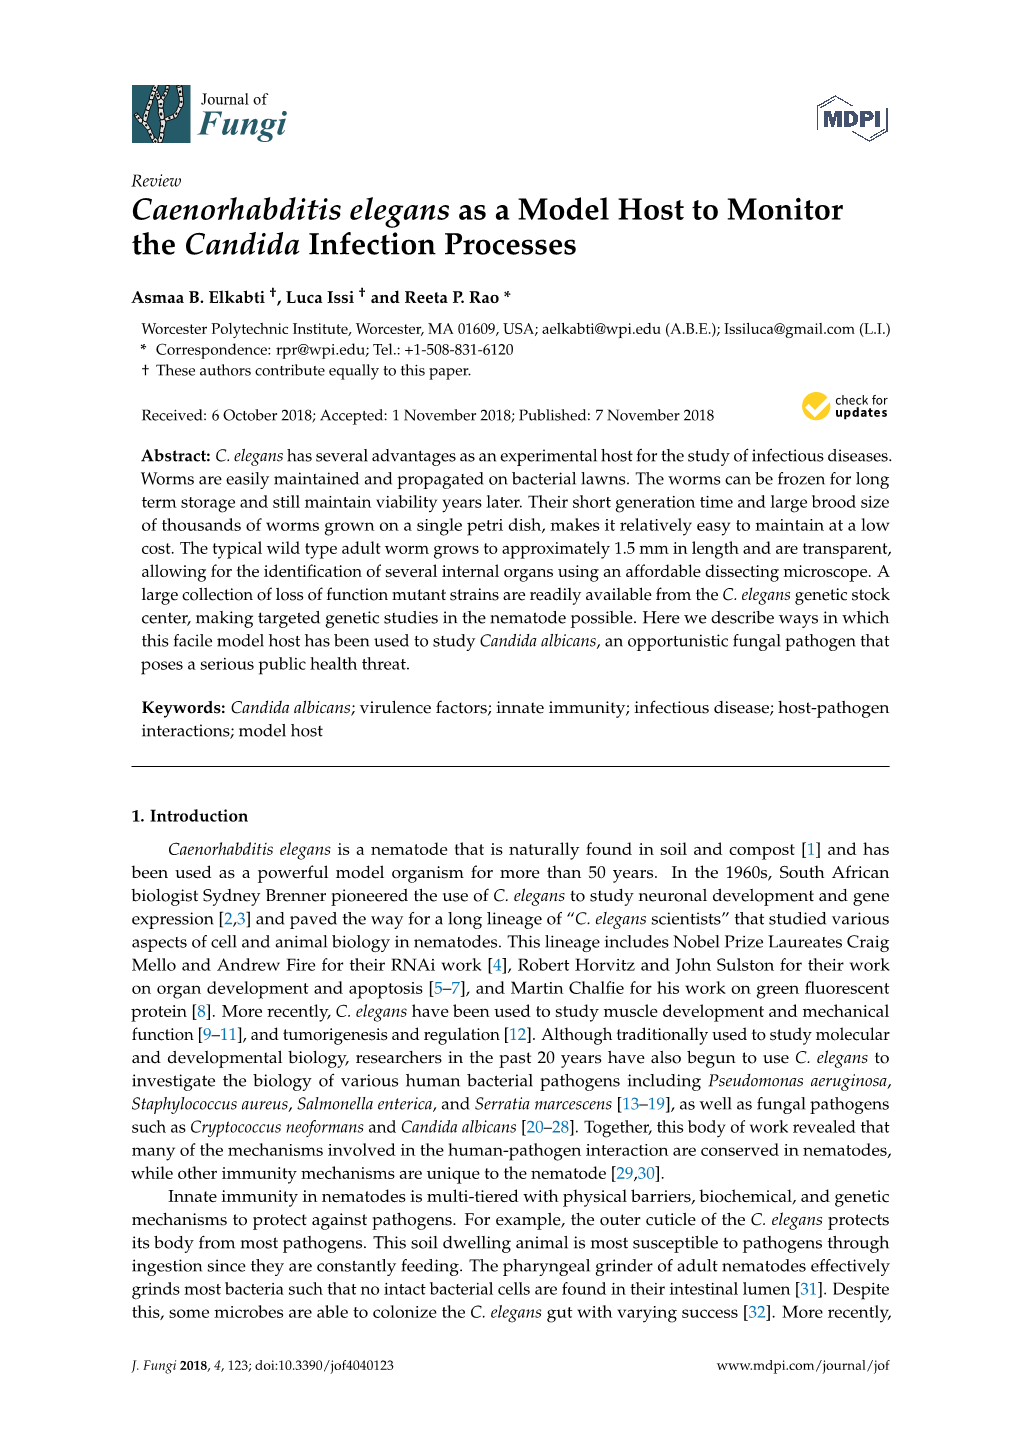 Caenorhabditis Elegans As a Model Host to Monitor the Candida Infection Processes